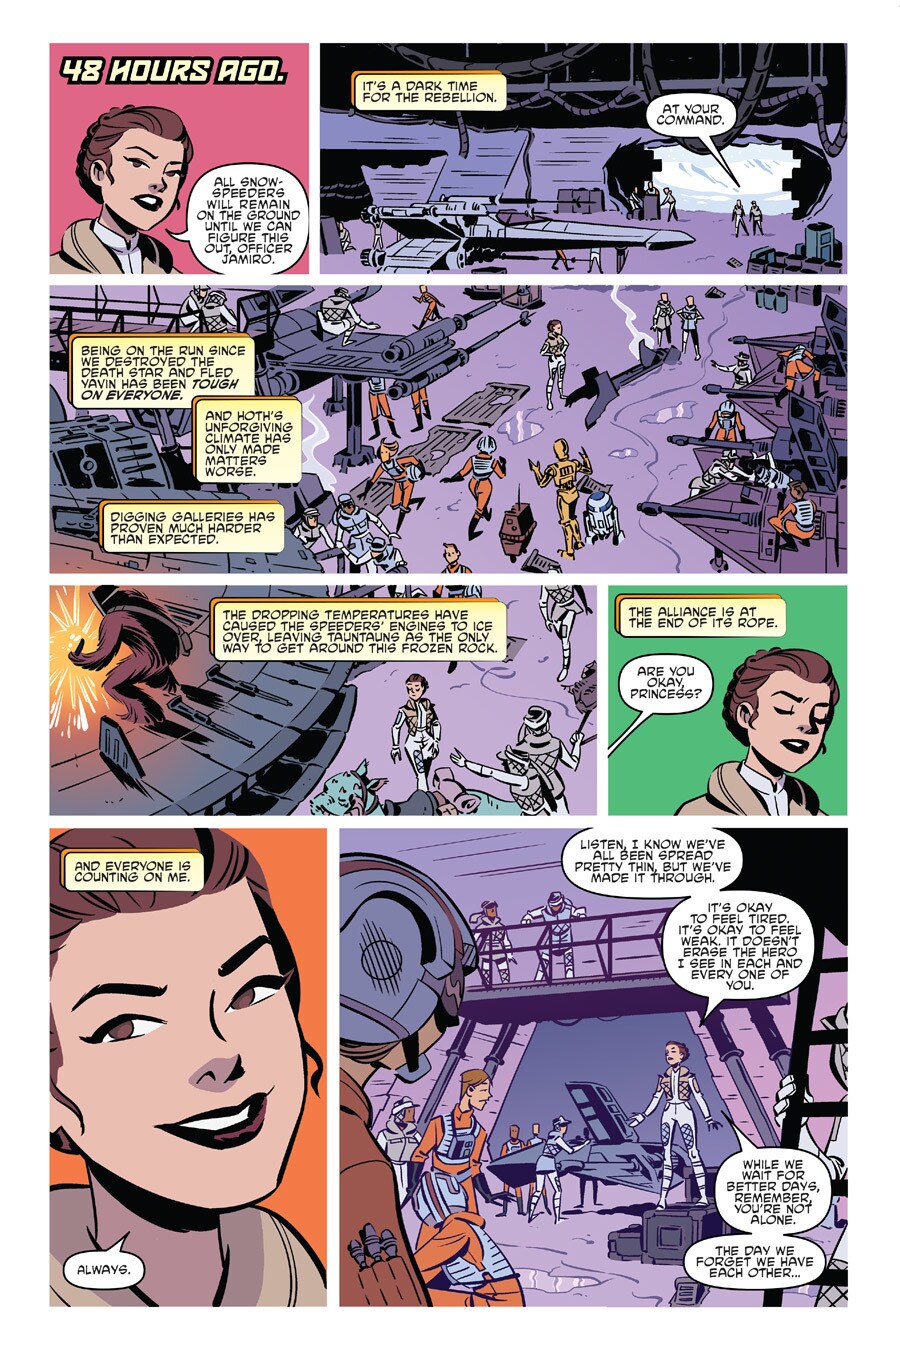 A page from a Star Wars Forces of Destiny comic book features Princess Leia directing operations inside the Rebel base on Hoth.